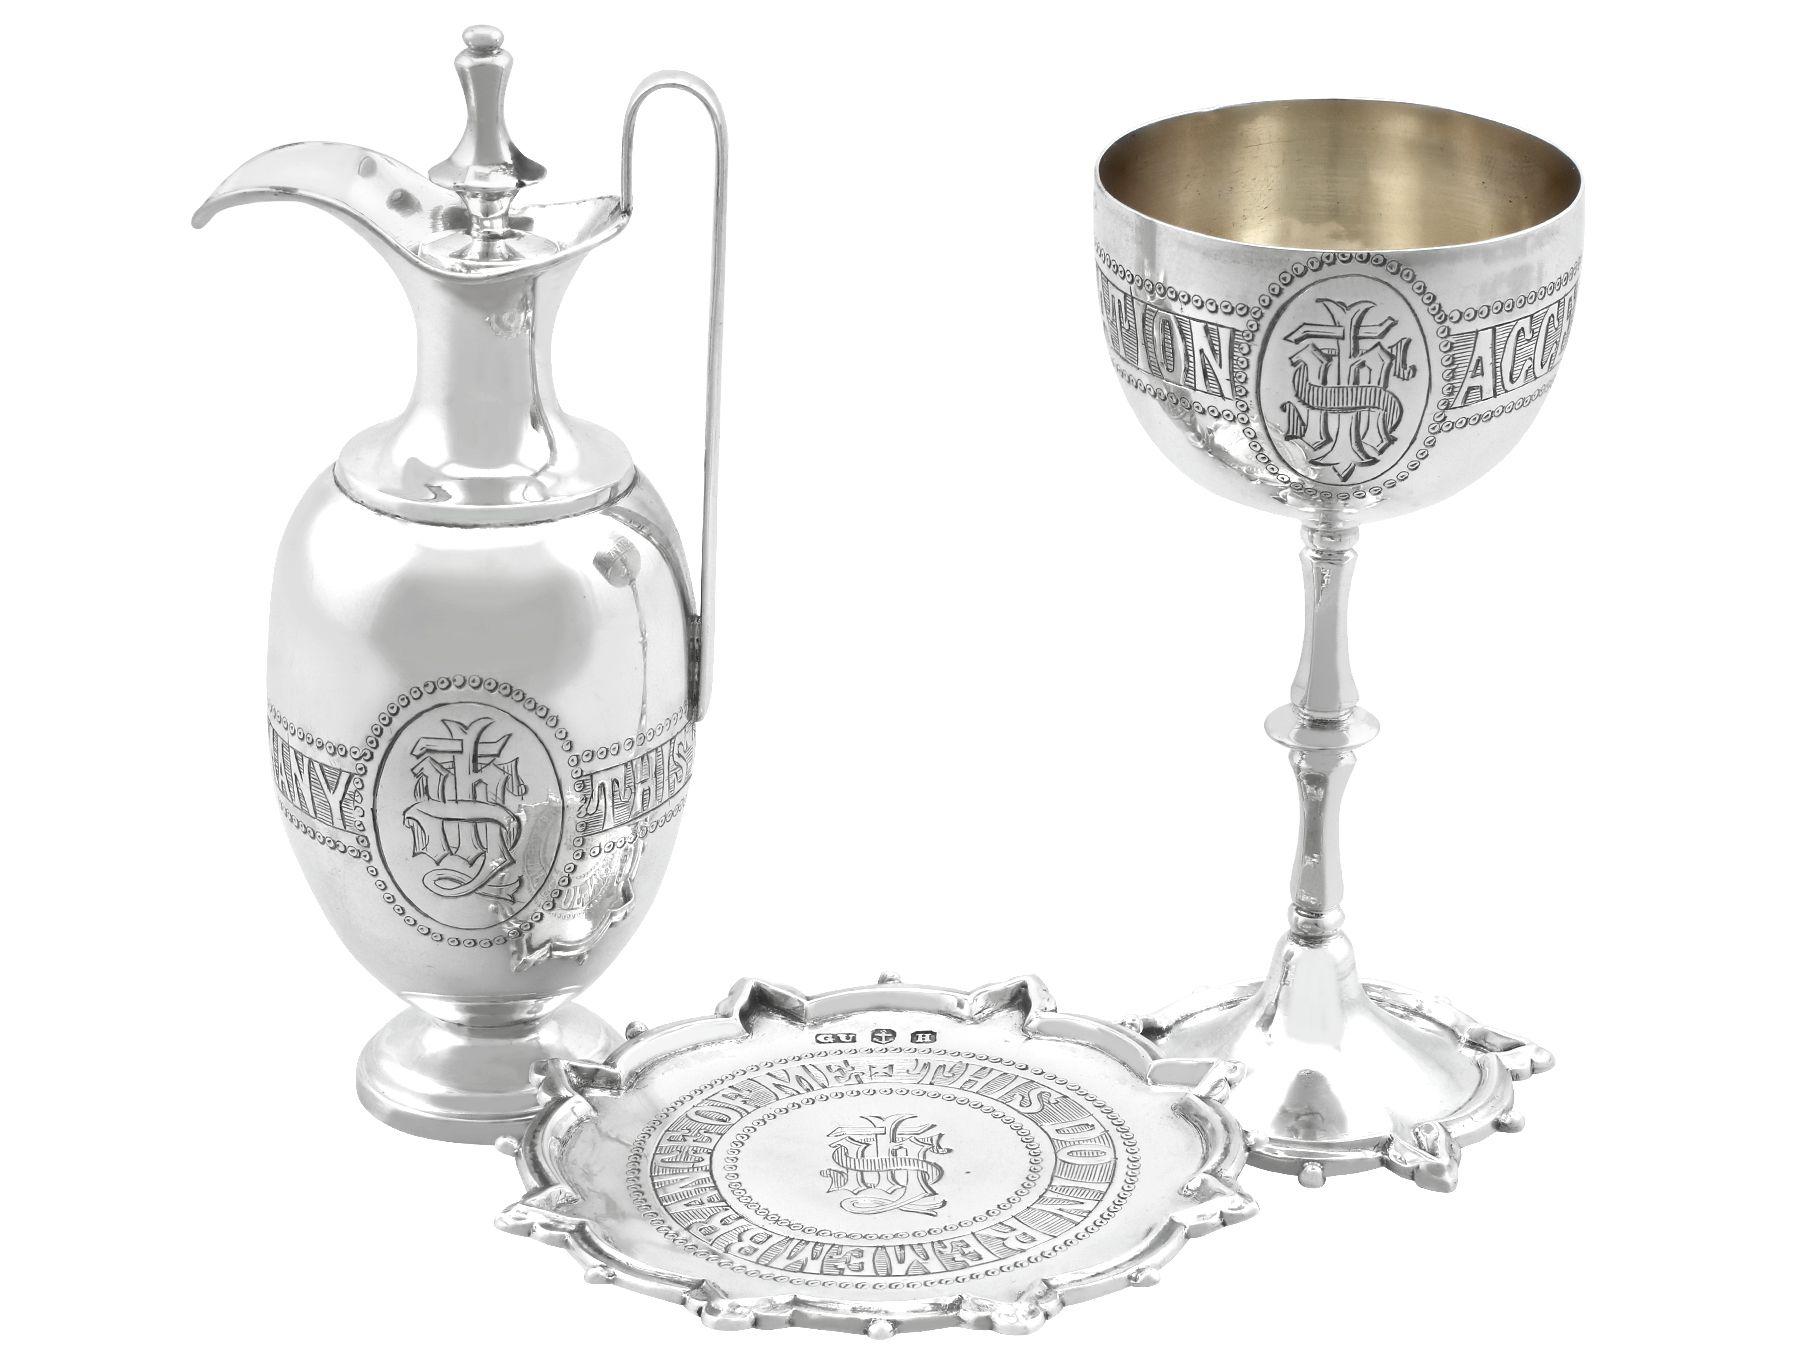 An exceptional, fine and impressive antique Victorian English sterling silver communion set; an addition to our diverse religious silverware collection

This exceptional antique Victorian cast sterling silver communion set consists of a chalice,